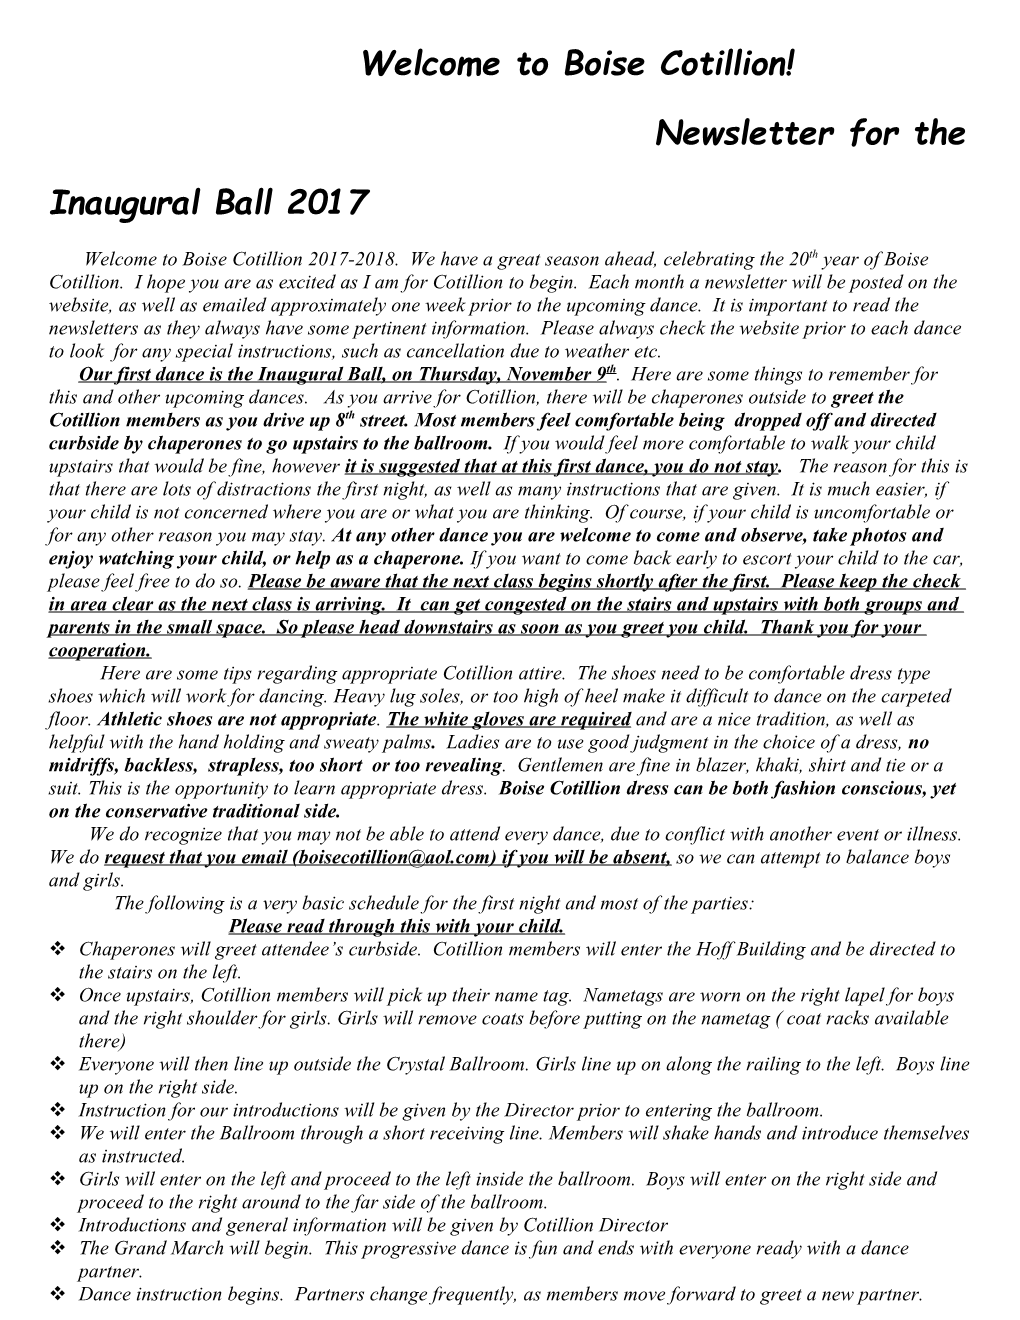 Newsletter for the Inaugural Ball 2017